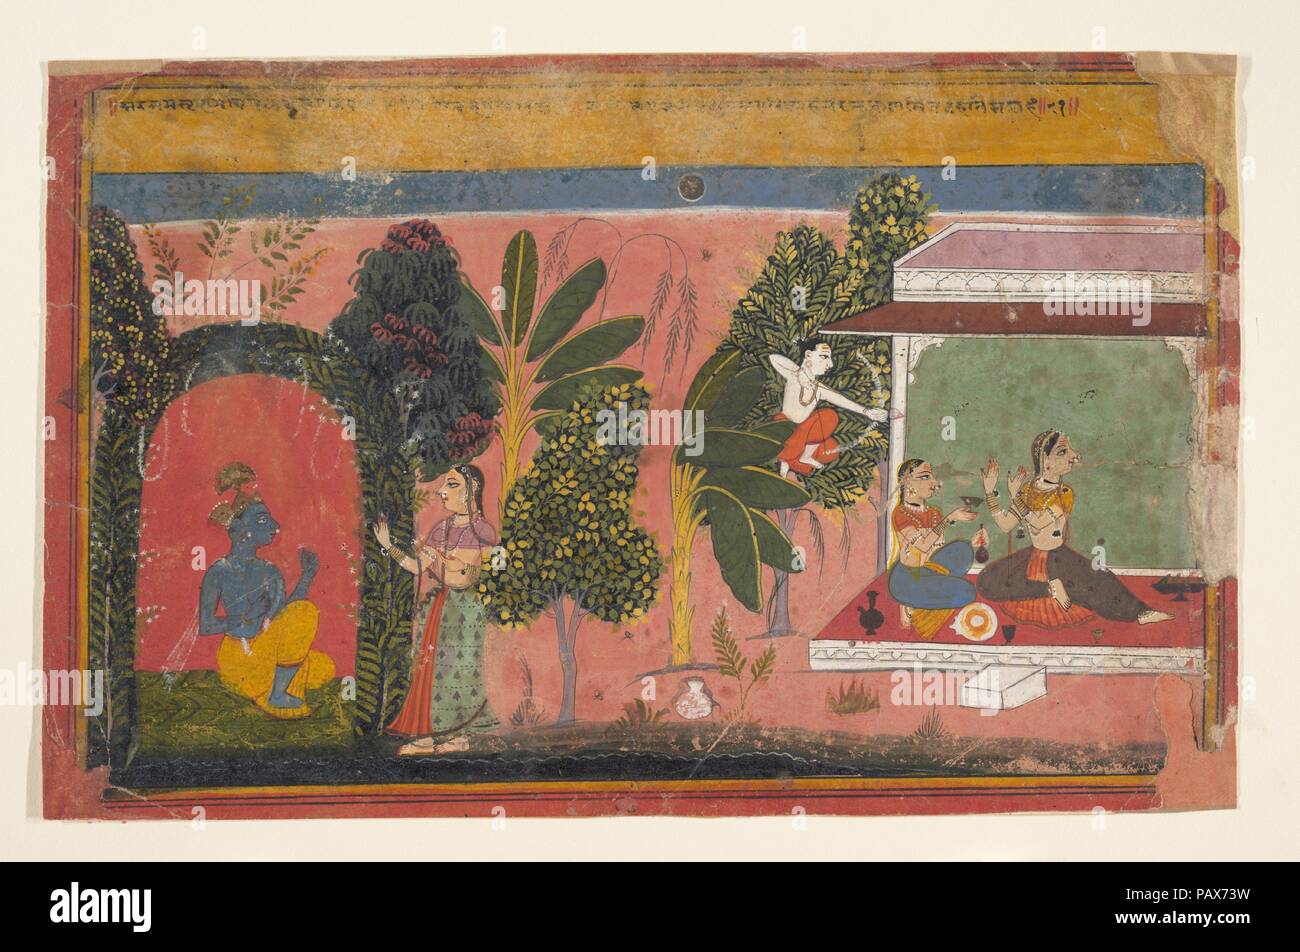 Kama Aims His Bow at Radha: Page From a Dispersed Gita Govinda (Loves of Krishna). Culture: India (Rajasthan, Mewar). Dimensions: H. 7 1/4 x  W. 11 3/8 in. (18.4 x 28.9 cm). Date: ca. 1695.  Vegetation and architecture divide this painting into thirds. On the right sits Radha, refusing to be comforted. From the trees, Kama, the Hindu god of love, aims arrows at Radha's heart, while at the center, Radha's friend walks through the woods to bring Krishna (left) back to his lover.   Paintings executed during the reign of Maharana Jai Singh (1680-98), like this one, tend to be executed more crudely Stock Photo